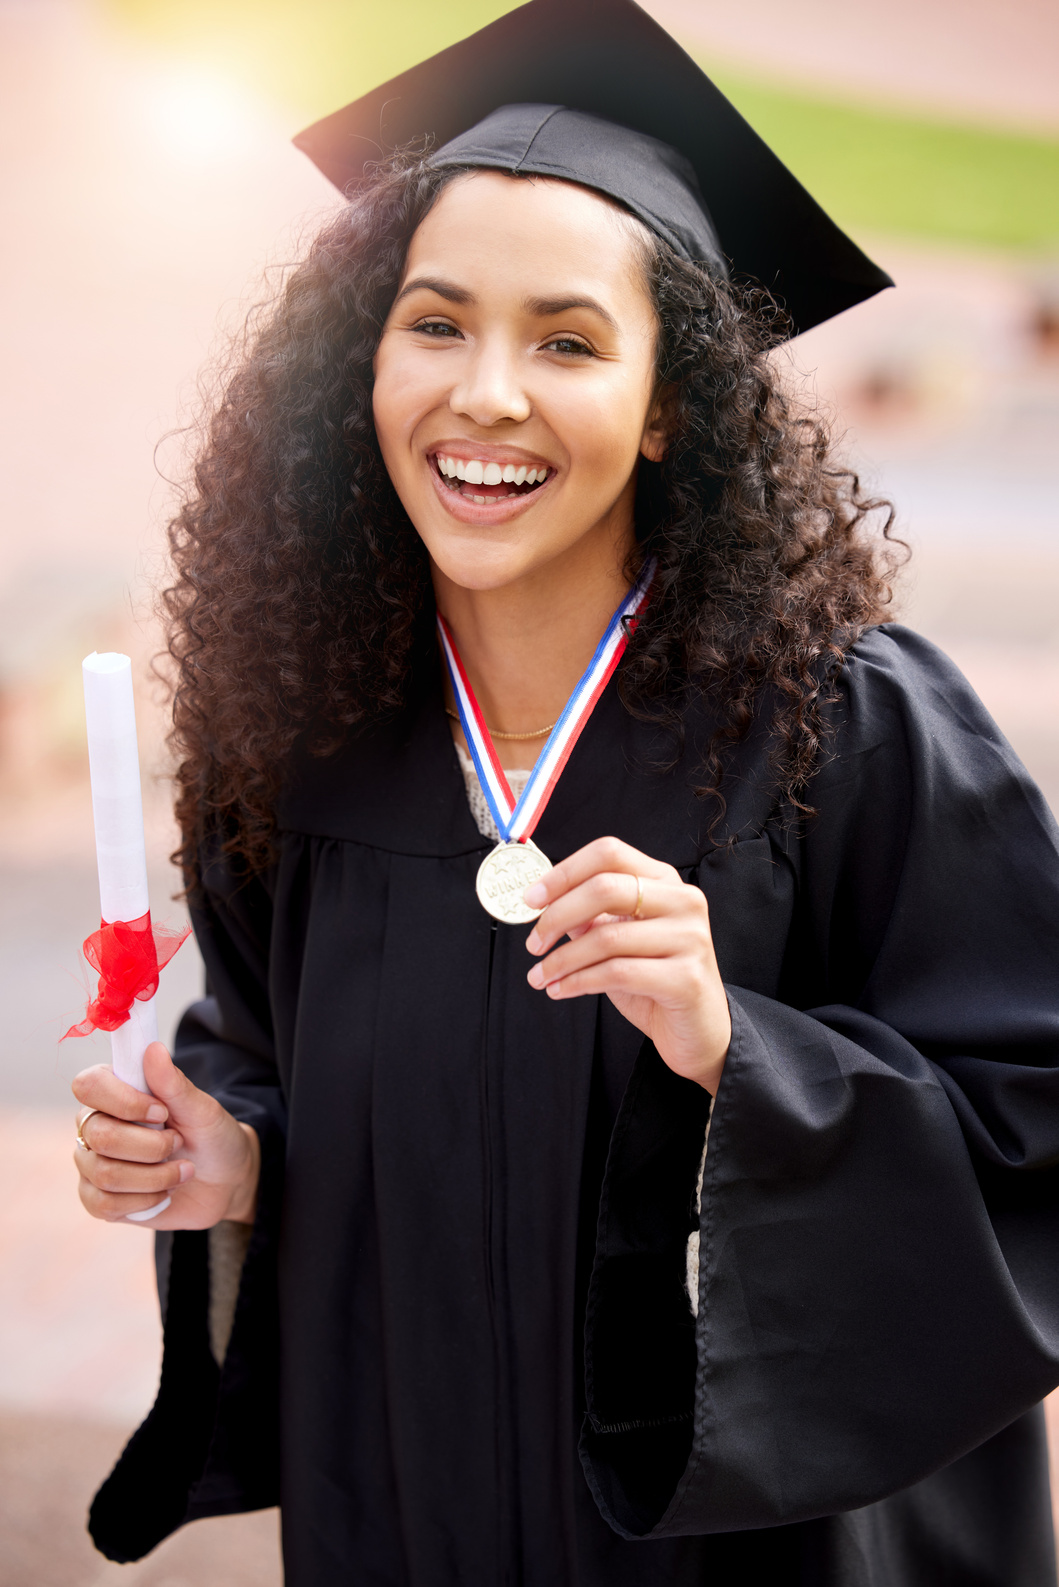 University Valedictorian, Woman Portrait and College Degree with Achievement with Medal. Female Person, Education Certificate and Campus Winner with Class Graduate and Happiness from Study Success